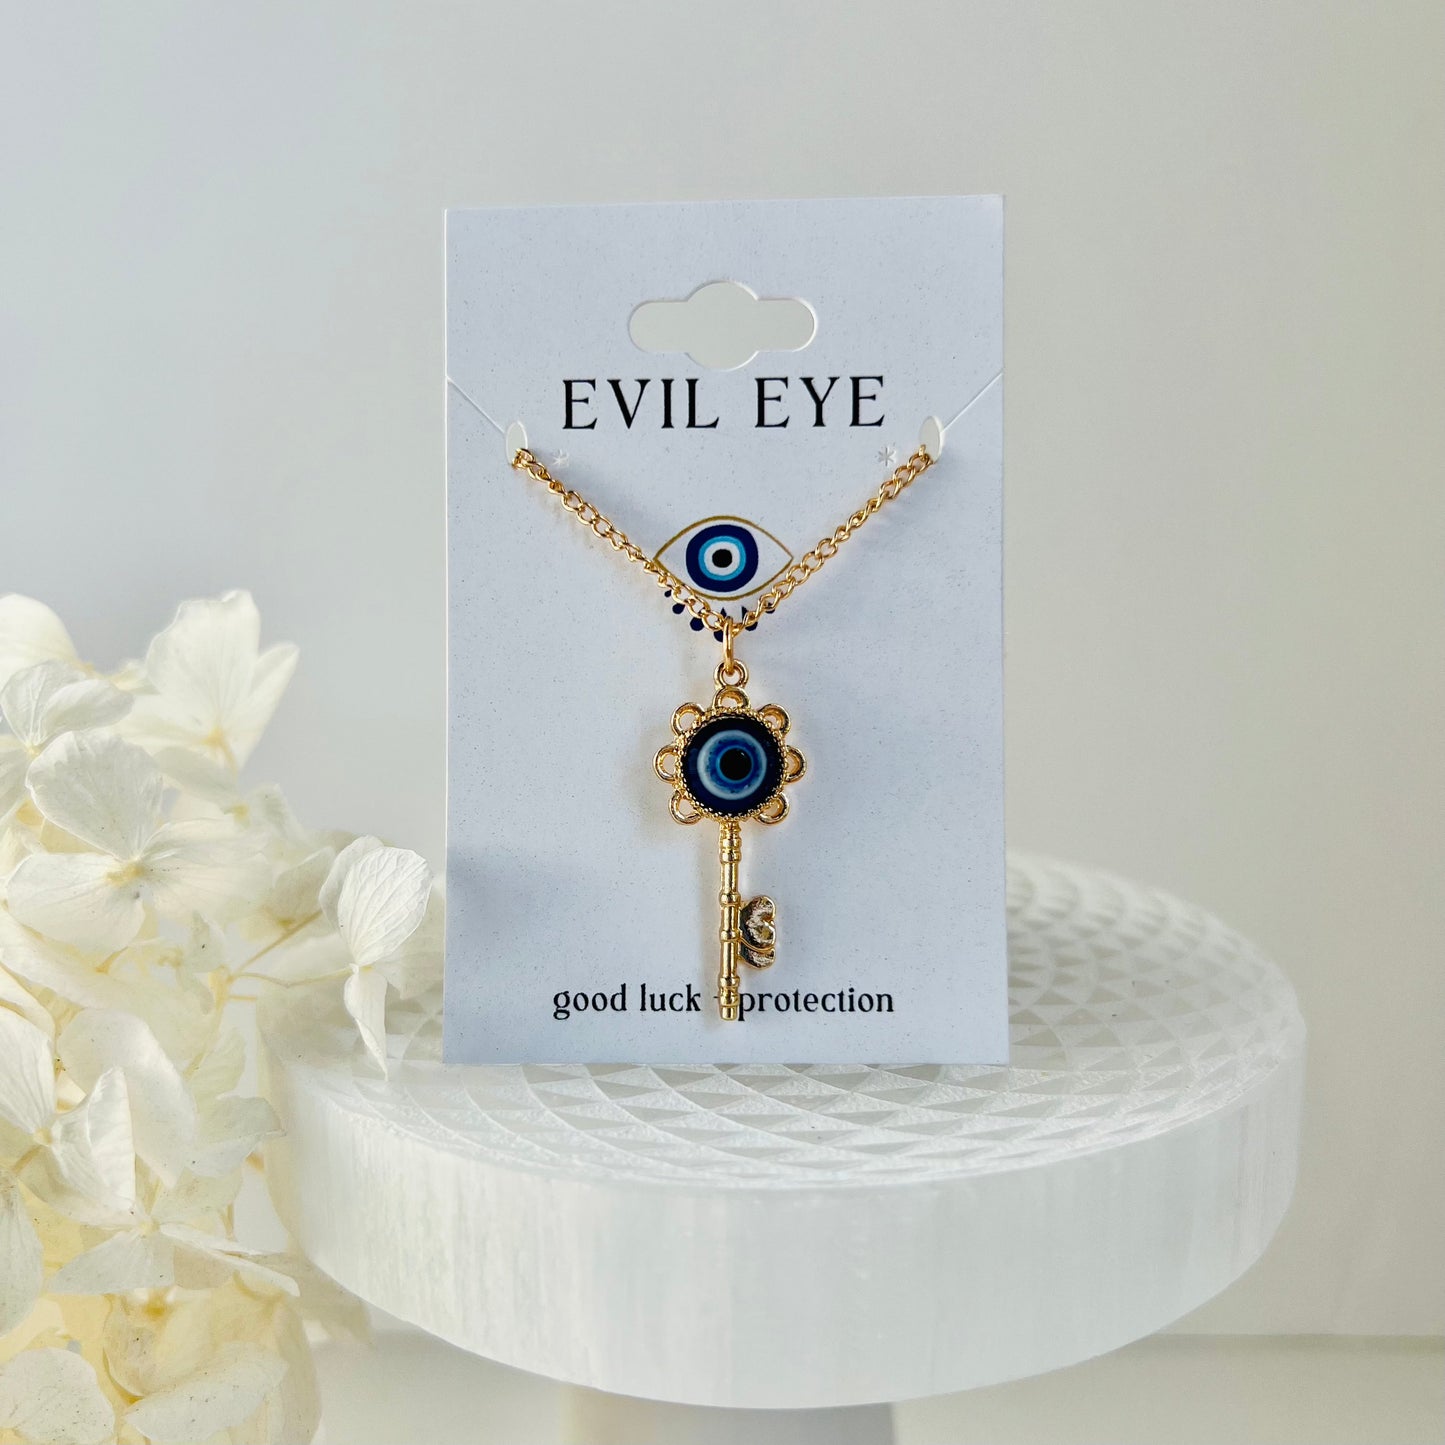 N5-Evil Eye Detail Key Pendant Necklace - Jewelry  from Shein